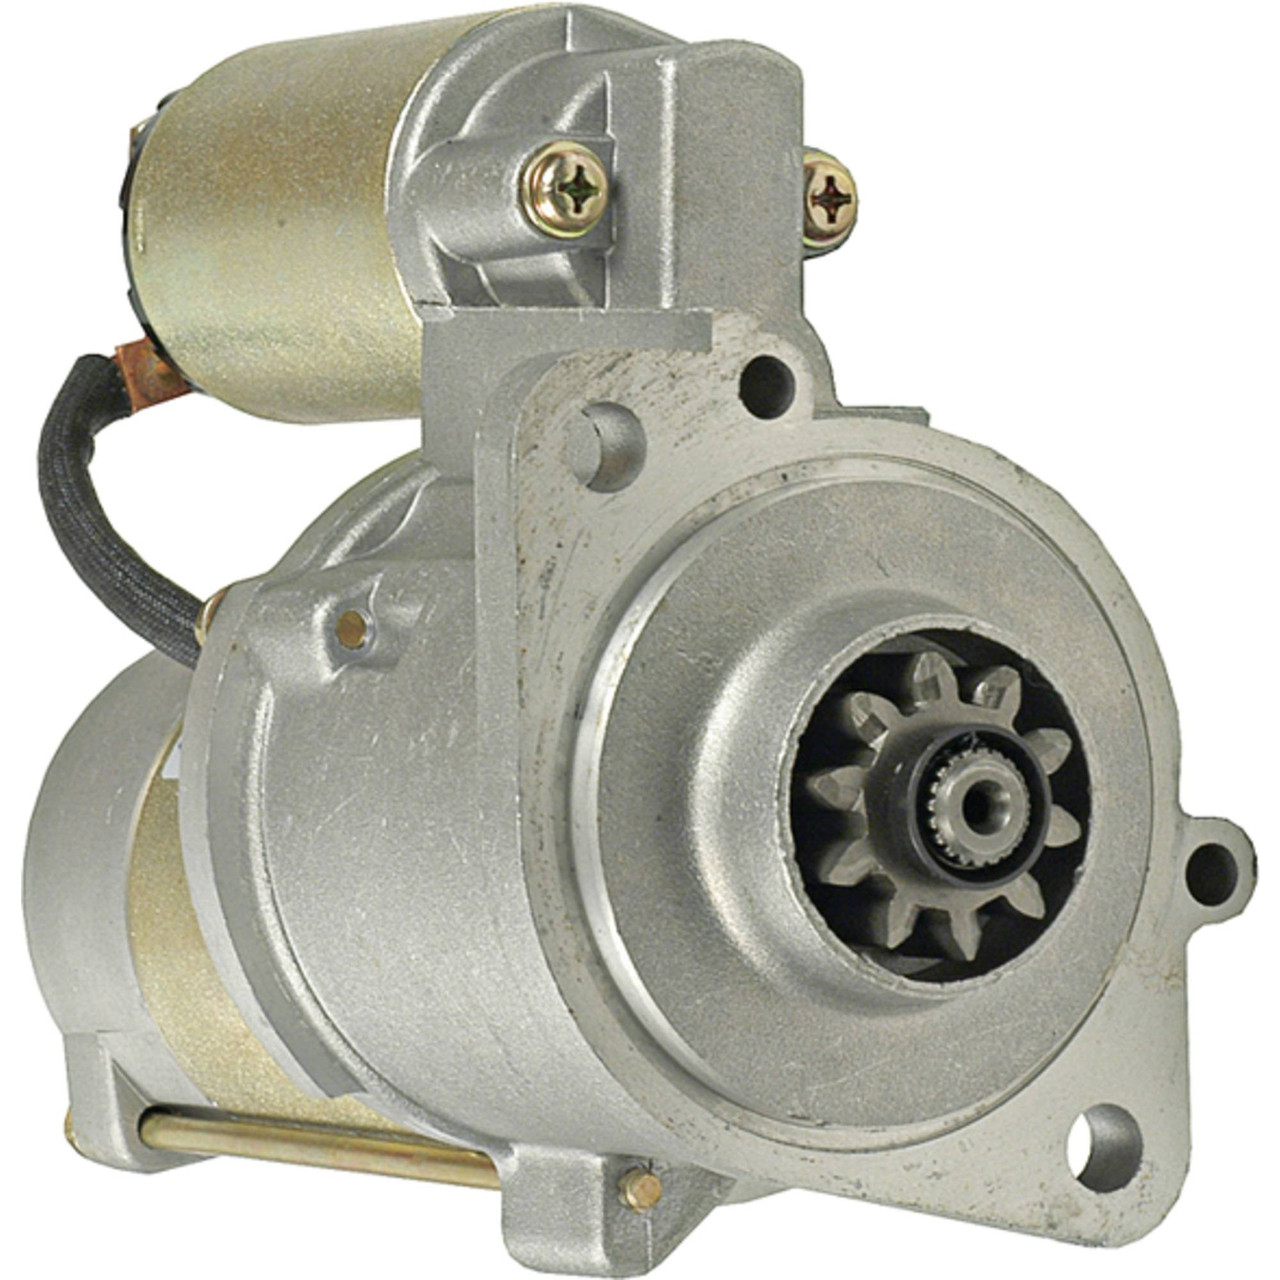 New Starter Motor Replacement for Mitsubishi Forklifts: M2T62271